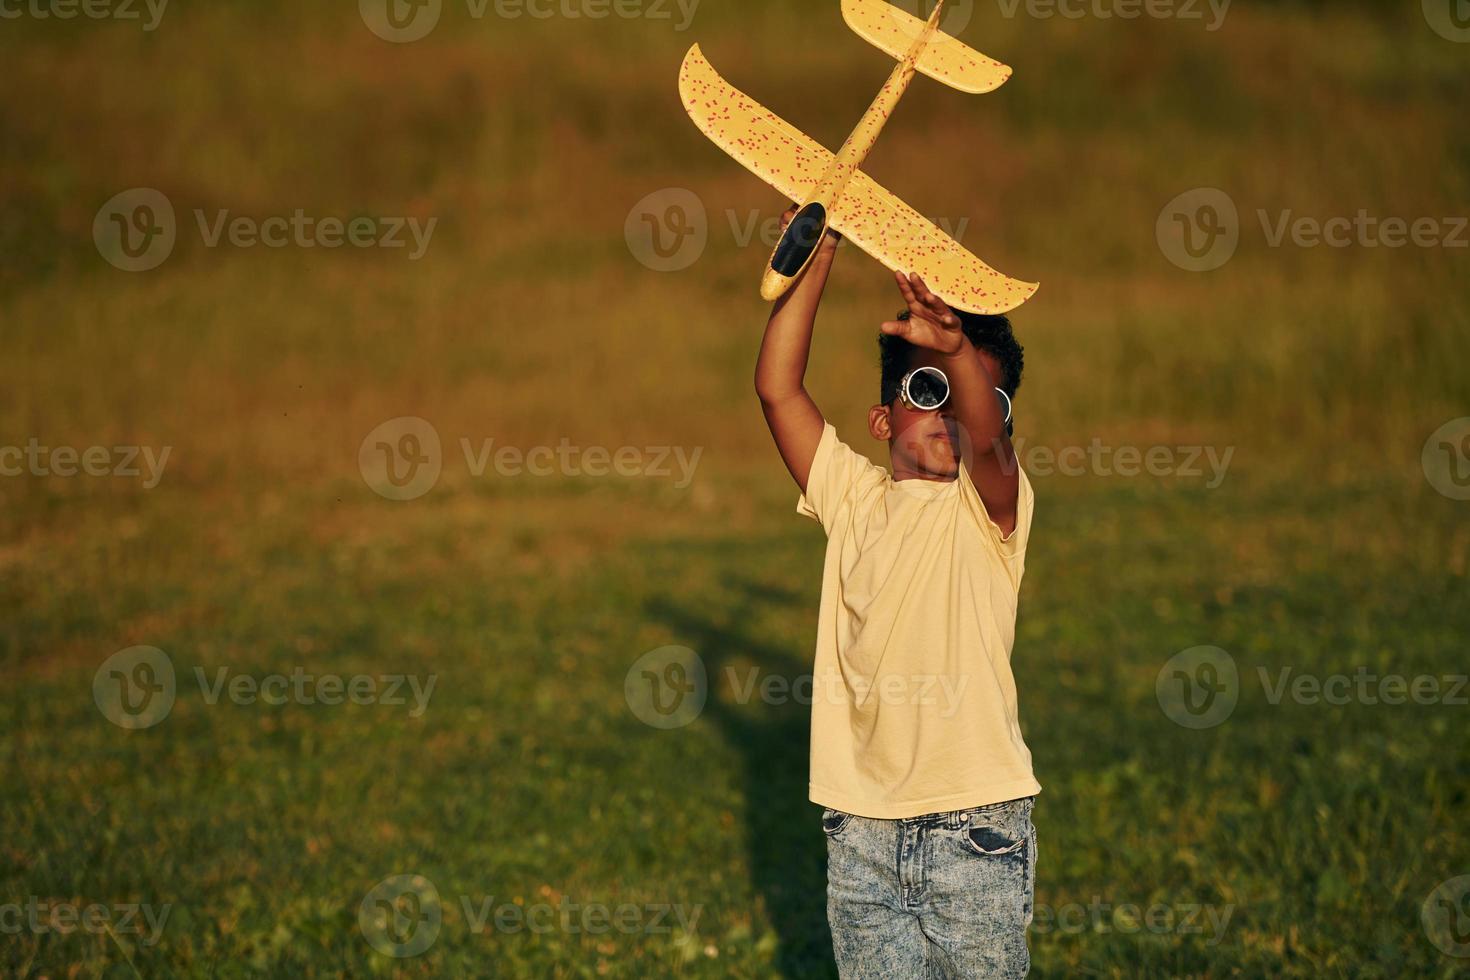 Retro style pilot sunglasses. African american kid have fun in the field at summer daytime photo